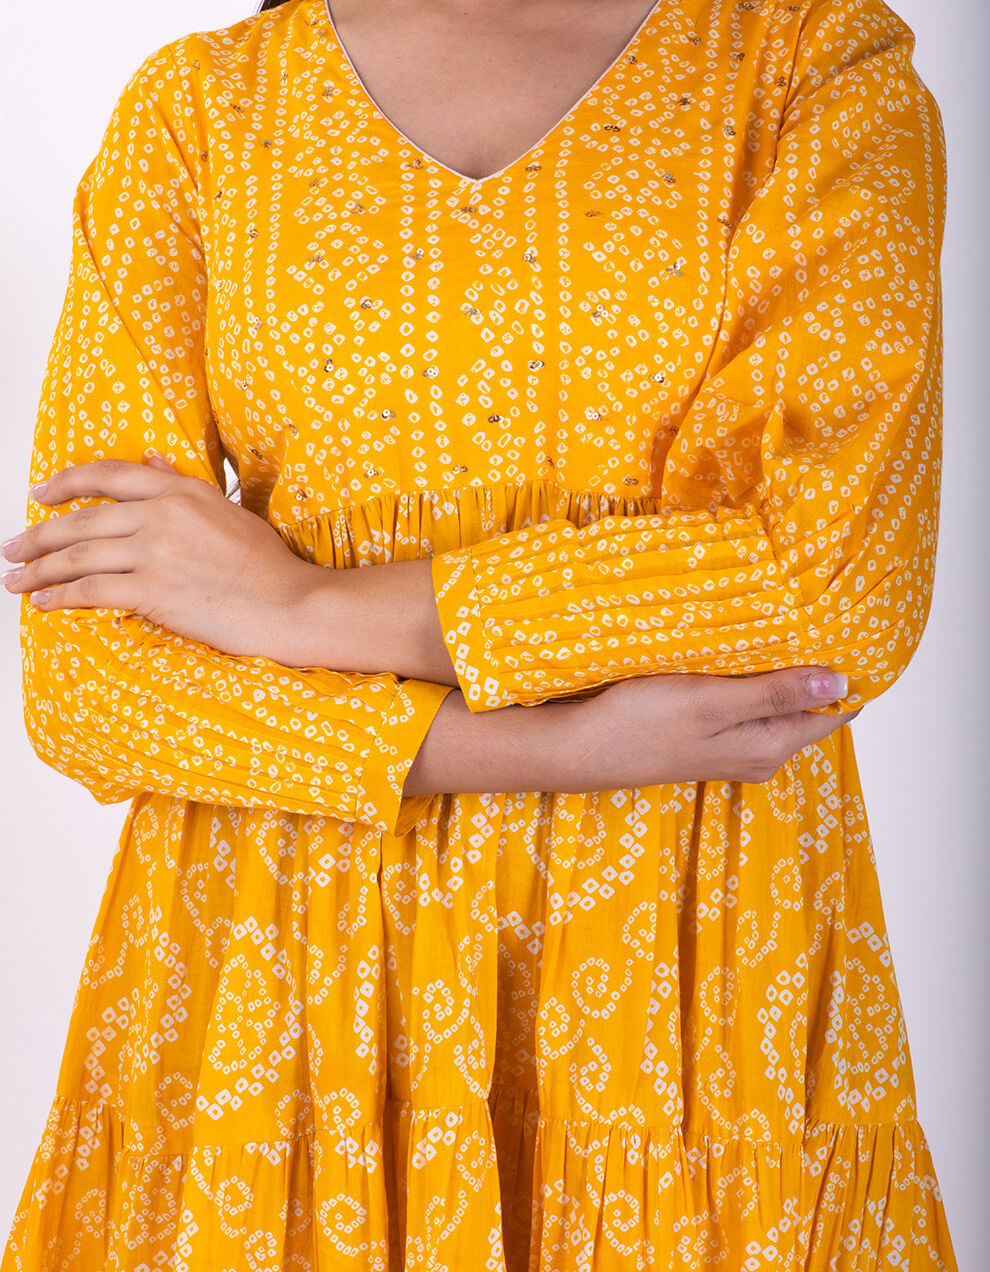 Get-brand-new-offers-on-Yellow-bandhani-cotton-kurta-designers-in-India-at-the-best-prices-3